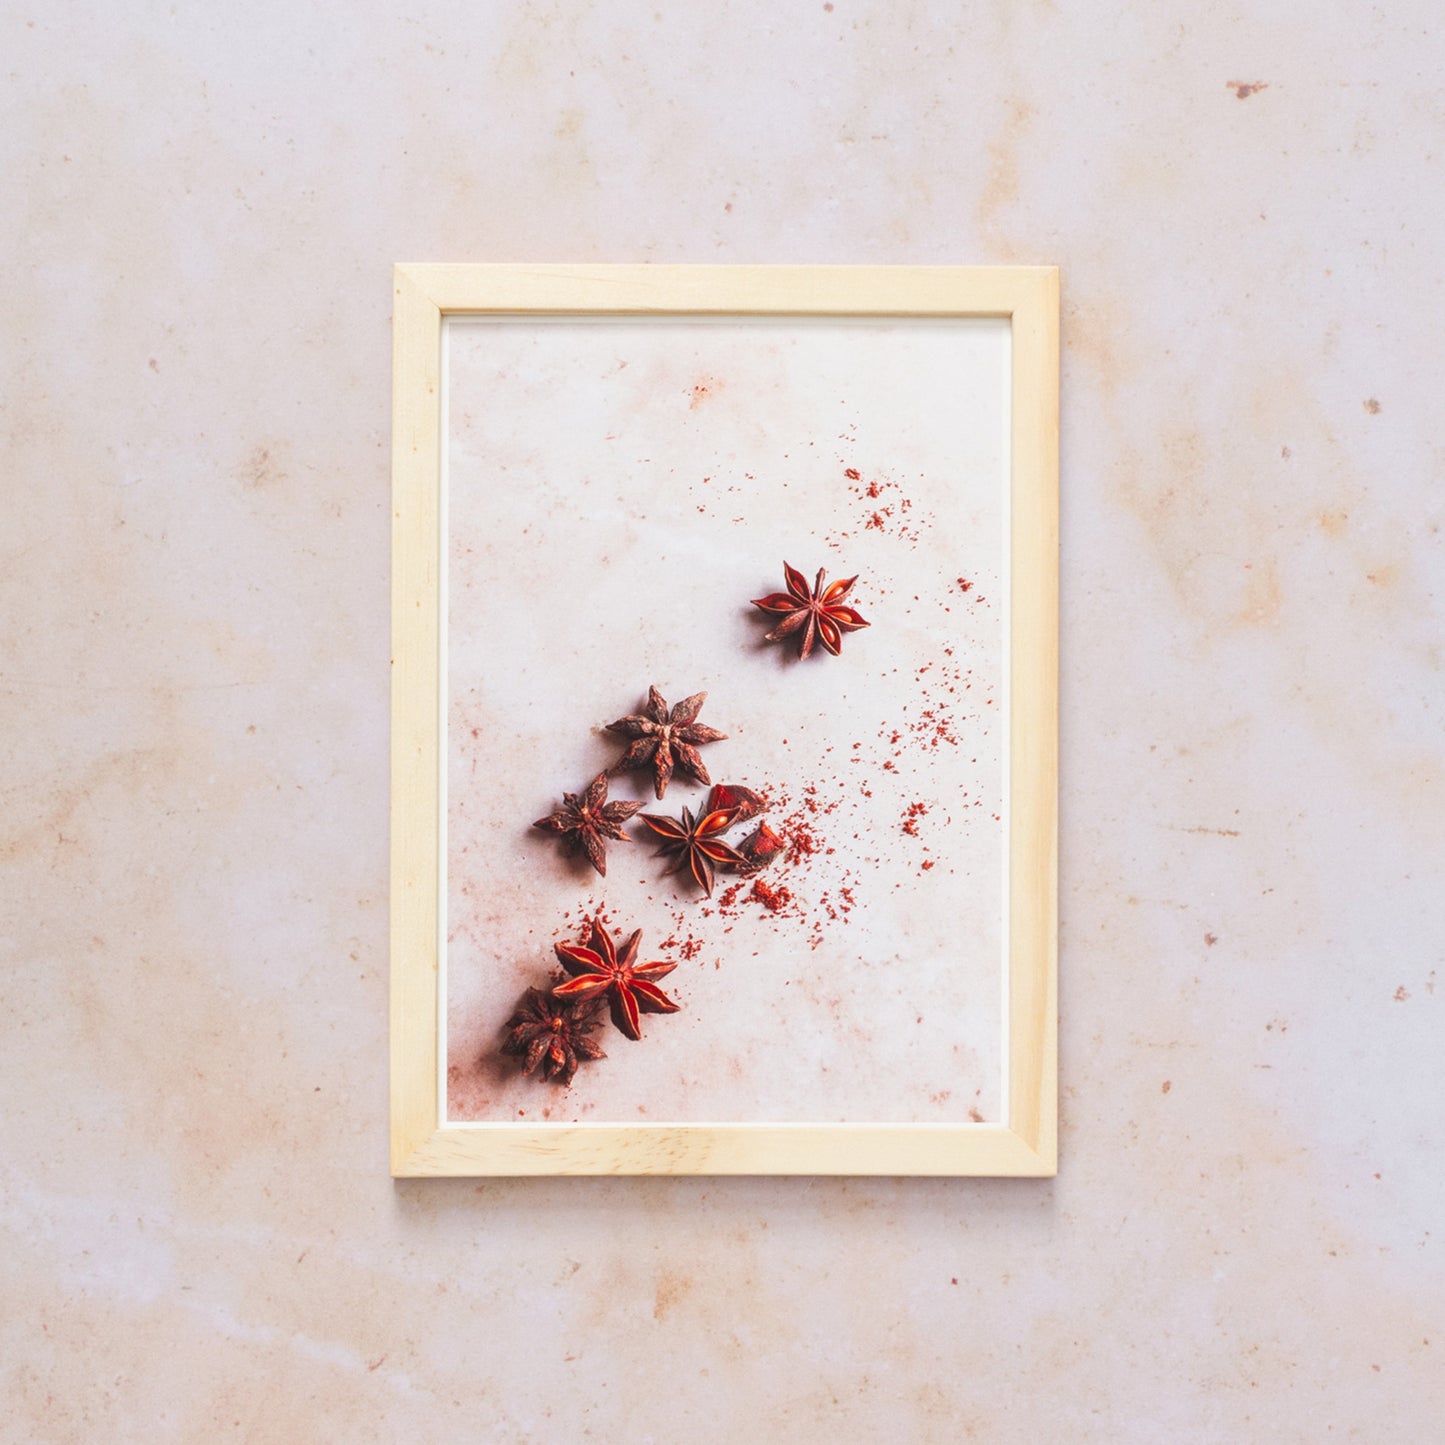 Photography of Star Anise on a pink marble background sold as a giclee fine art print